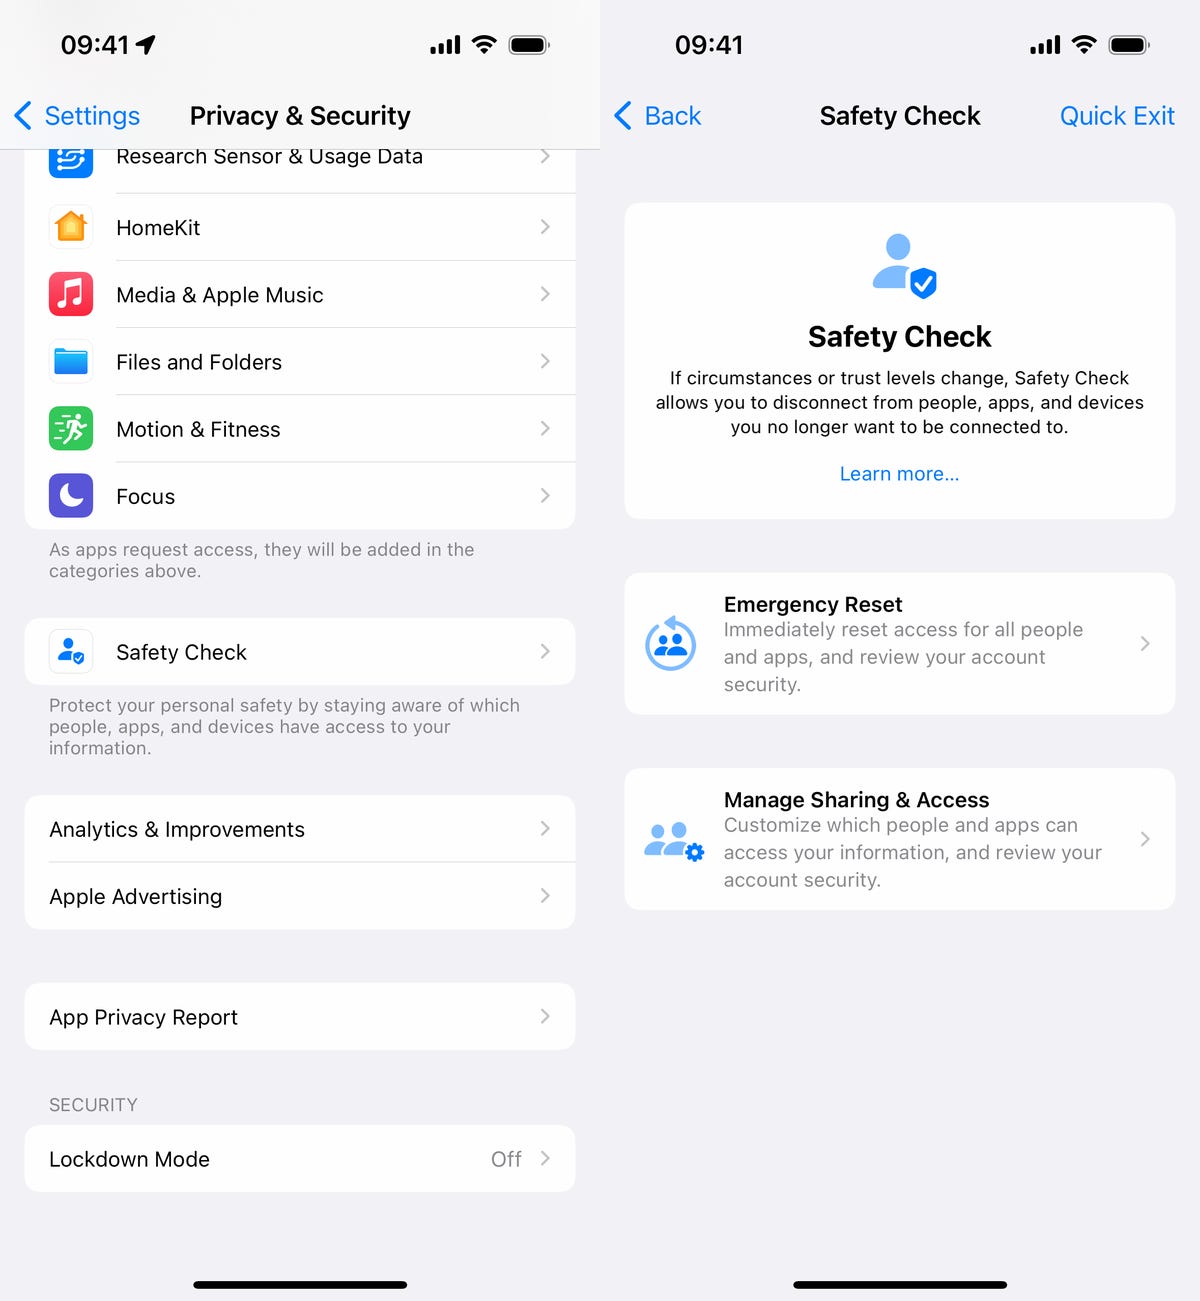 Safety Check settings in iOS